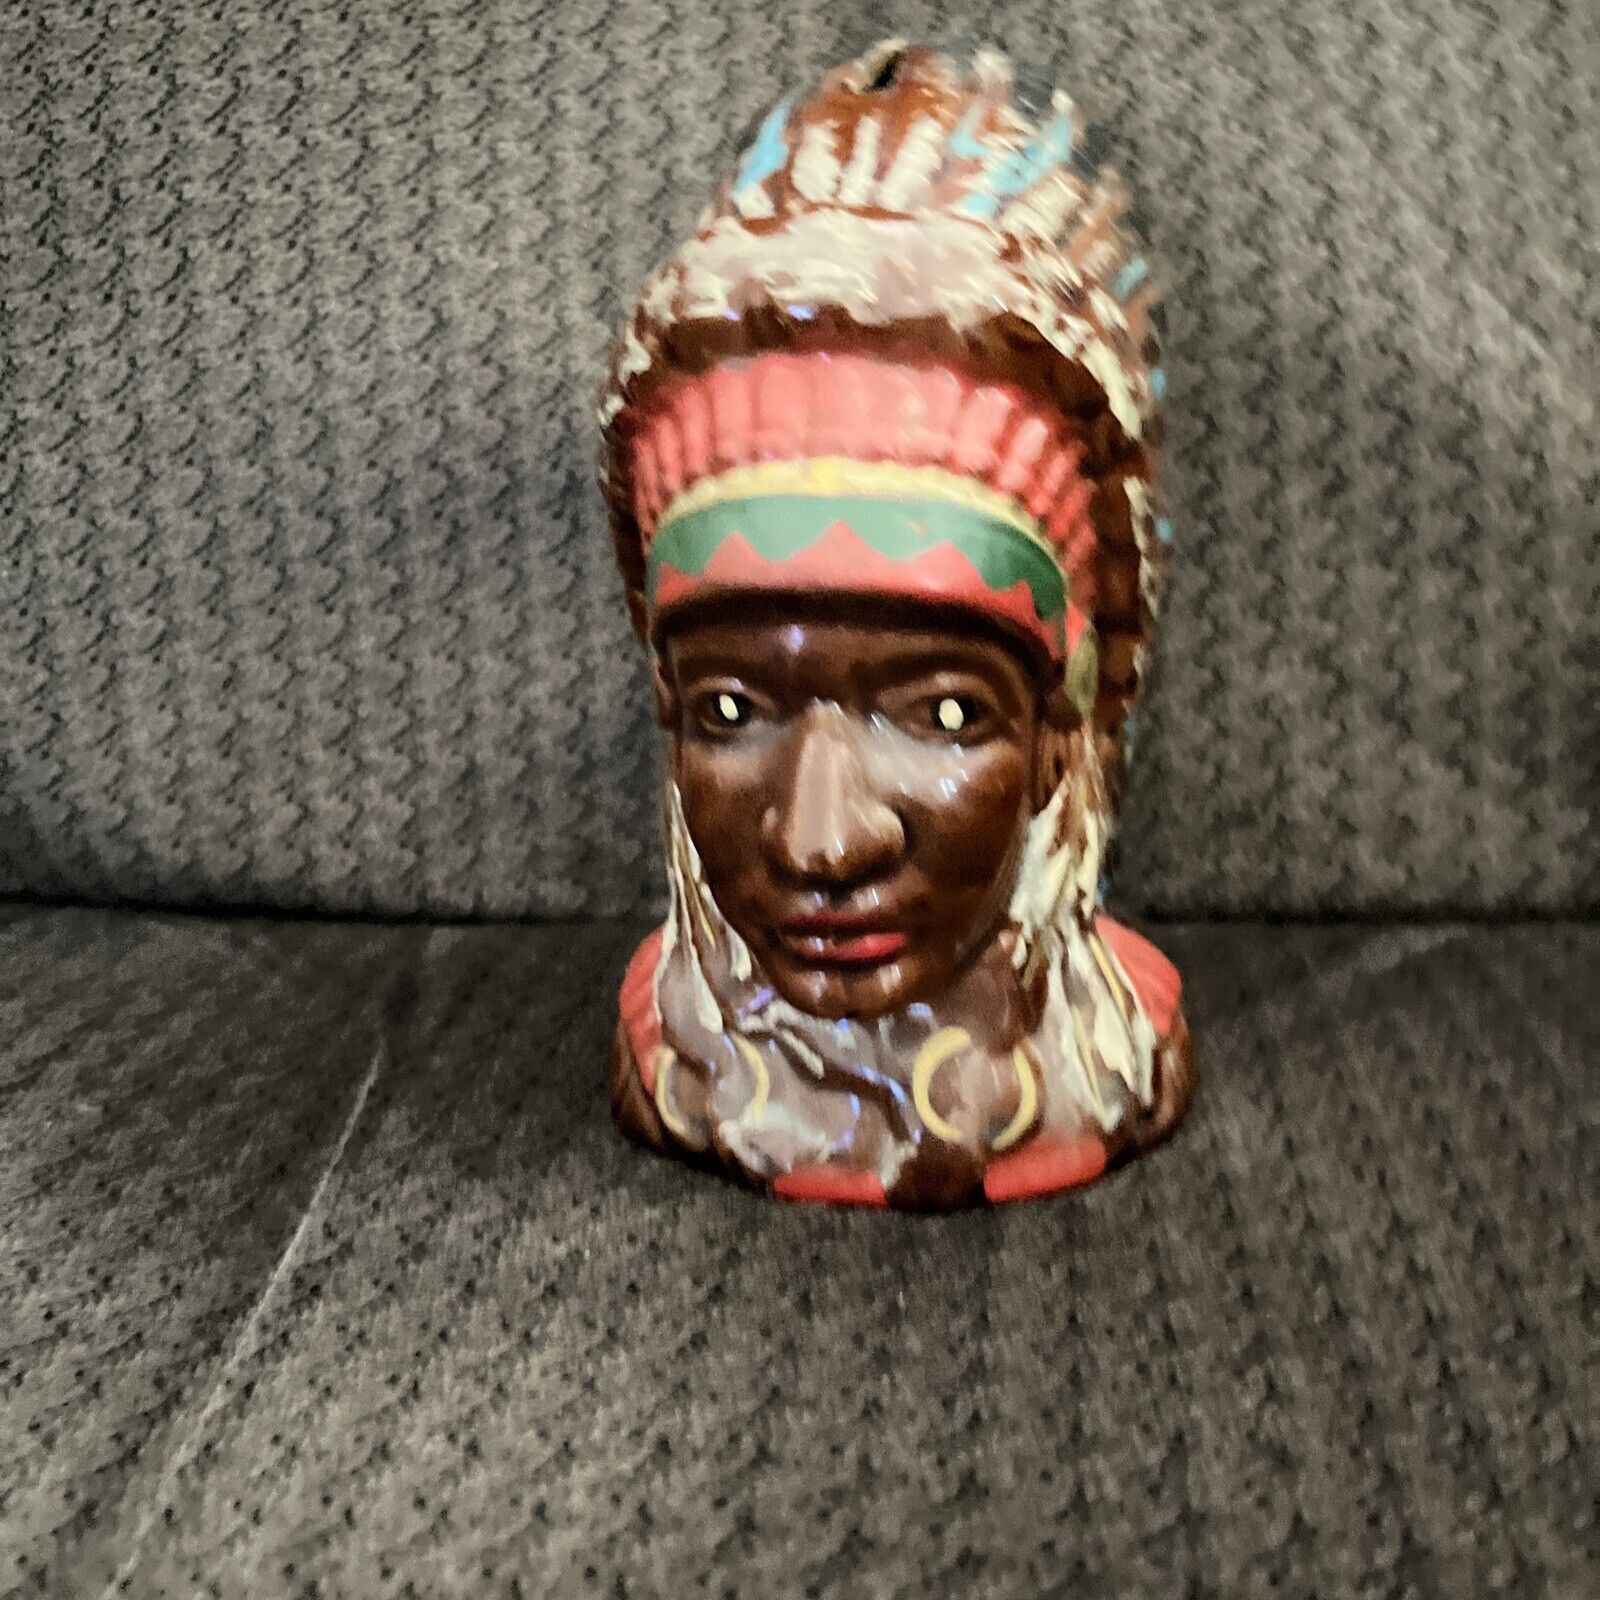 Vintage Native American Indian Chief Ceramic Coin Bank Japan 5.5 Still Looks New